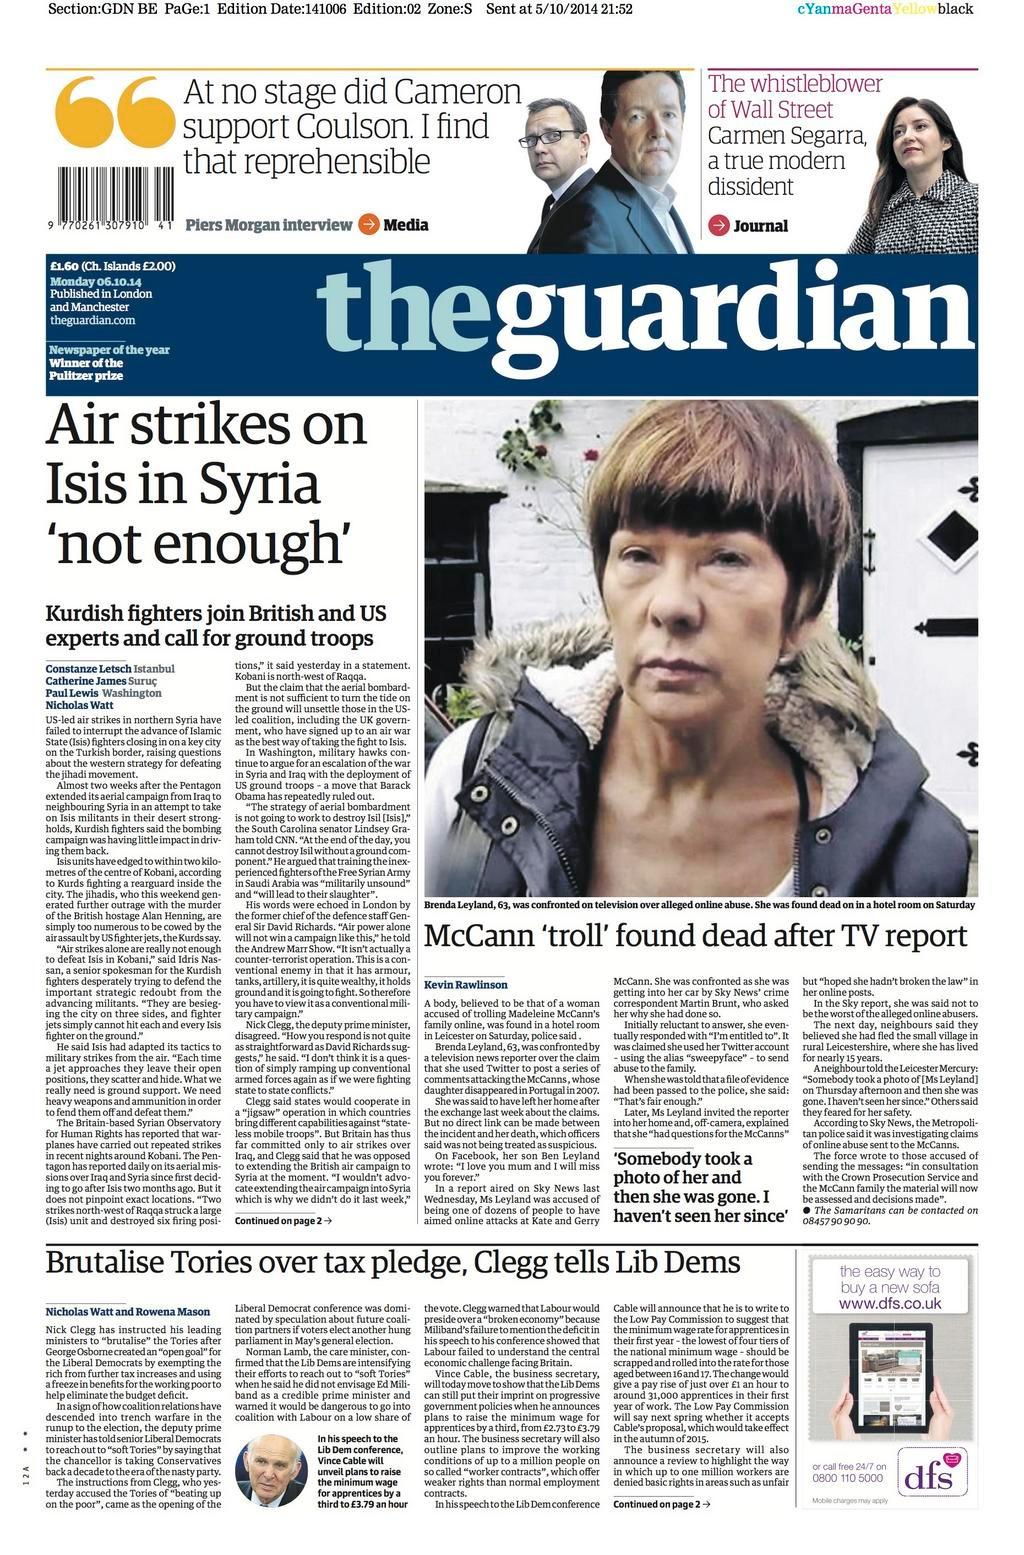 McCann 'troll' found dead after TV report The Guardian (paper edition)